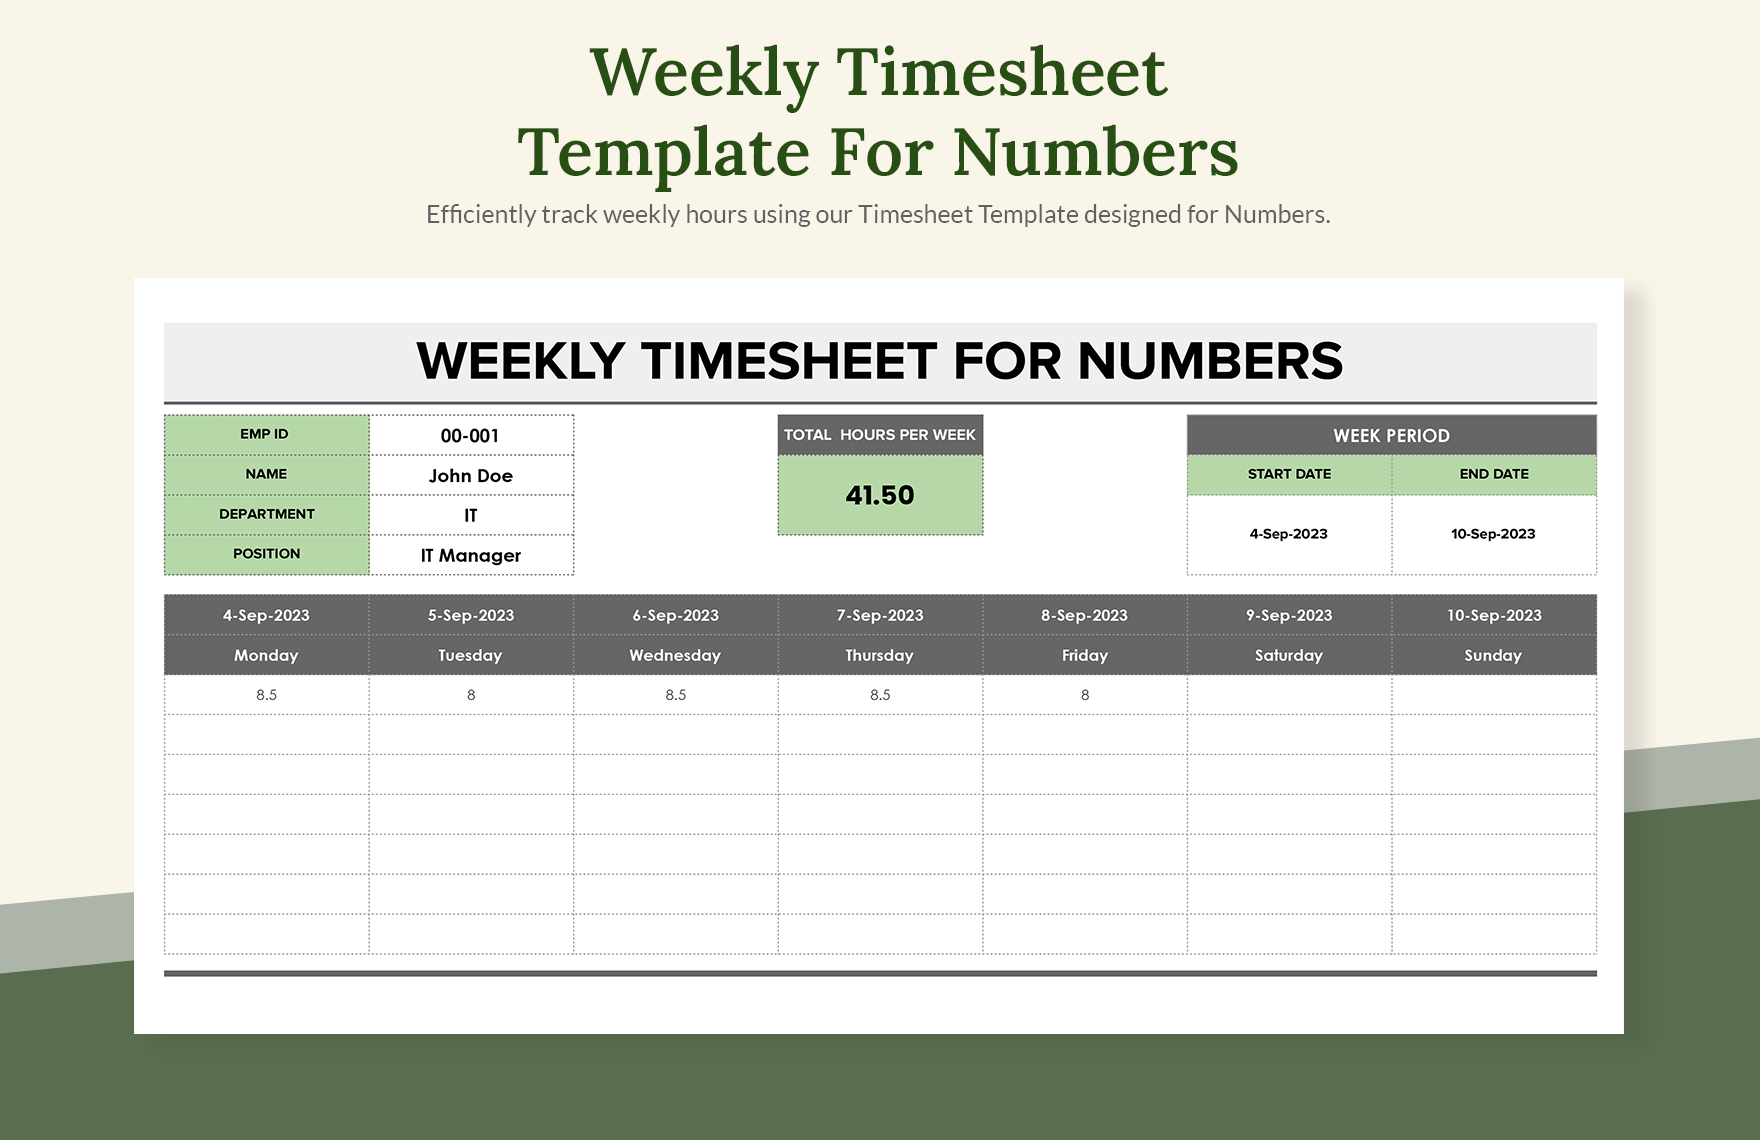 weekly-timesheet-for-numbers